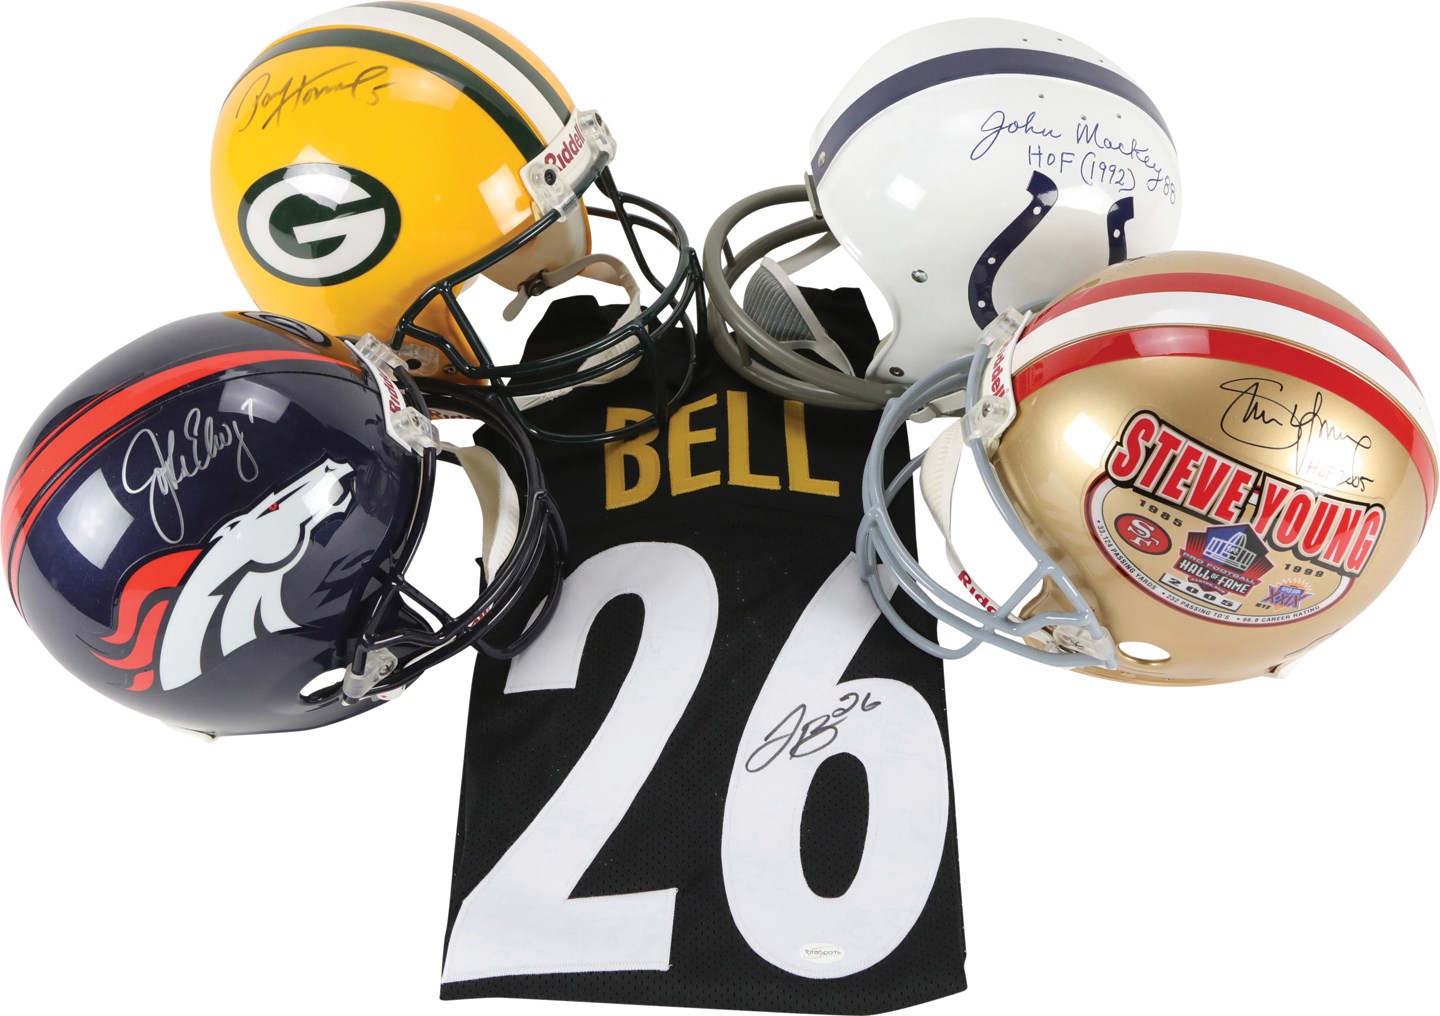 - NFL Signed Full Size Helmet & Jersey Collection (5)